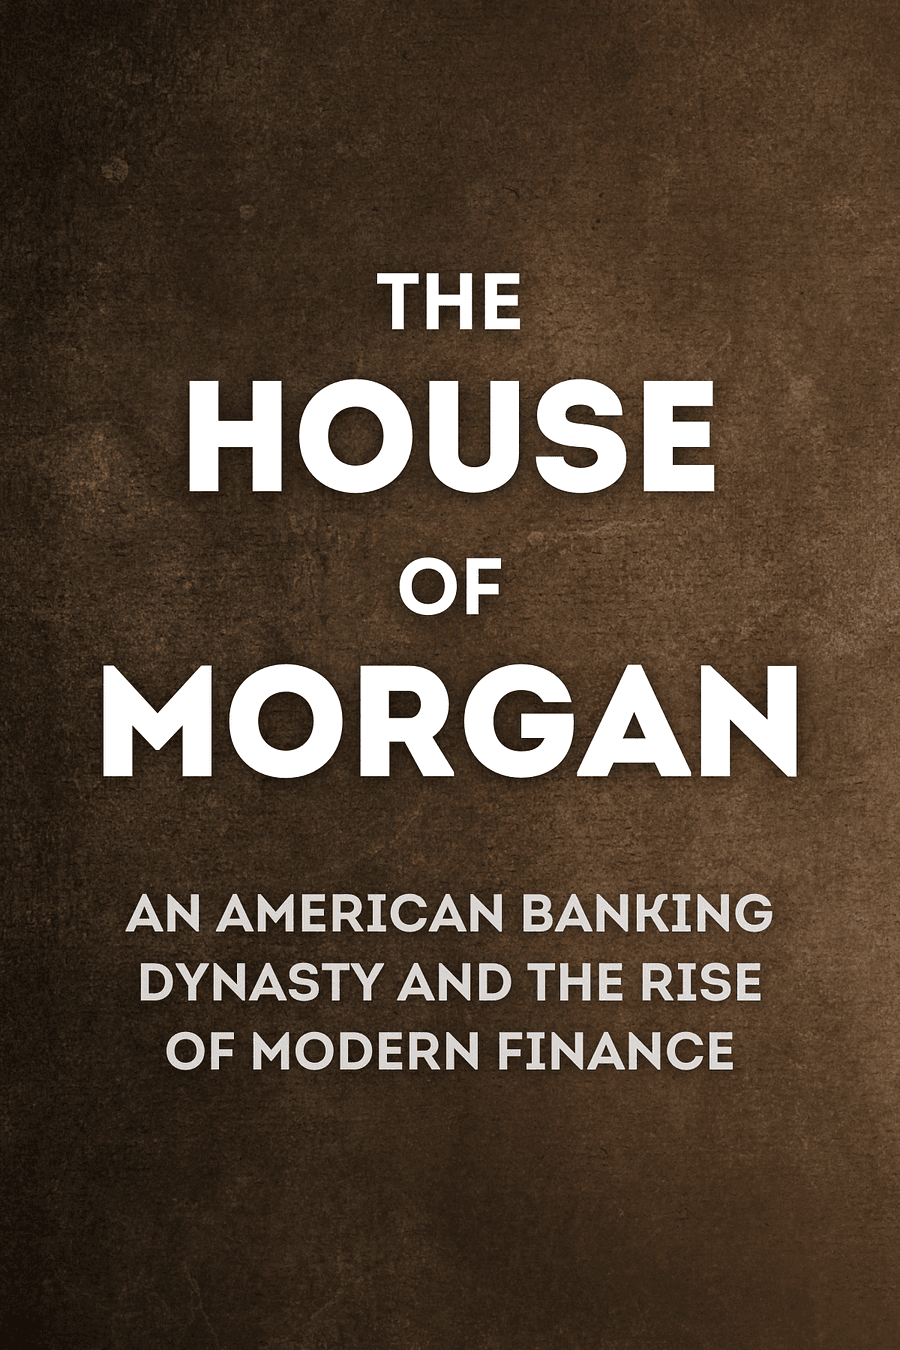 The House of Morgan by Ron Chernow - Book Summary